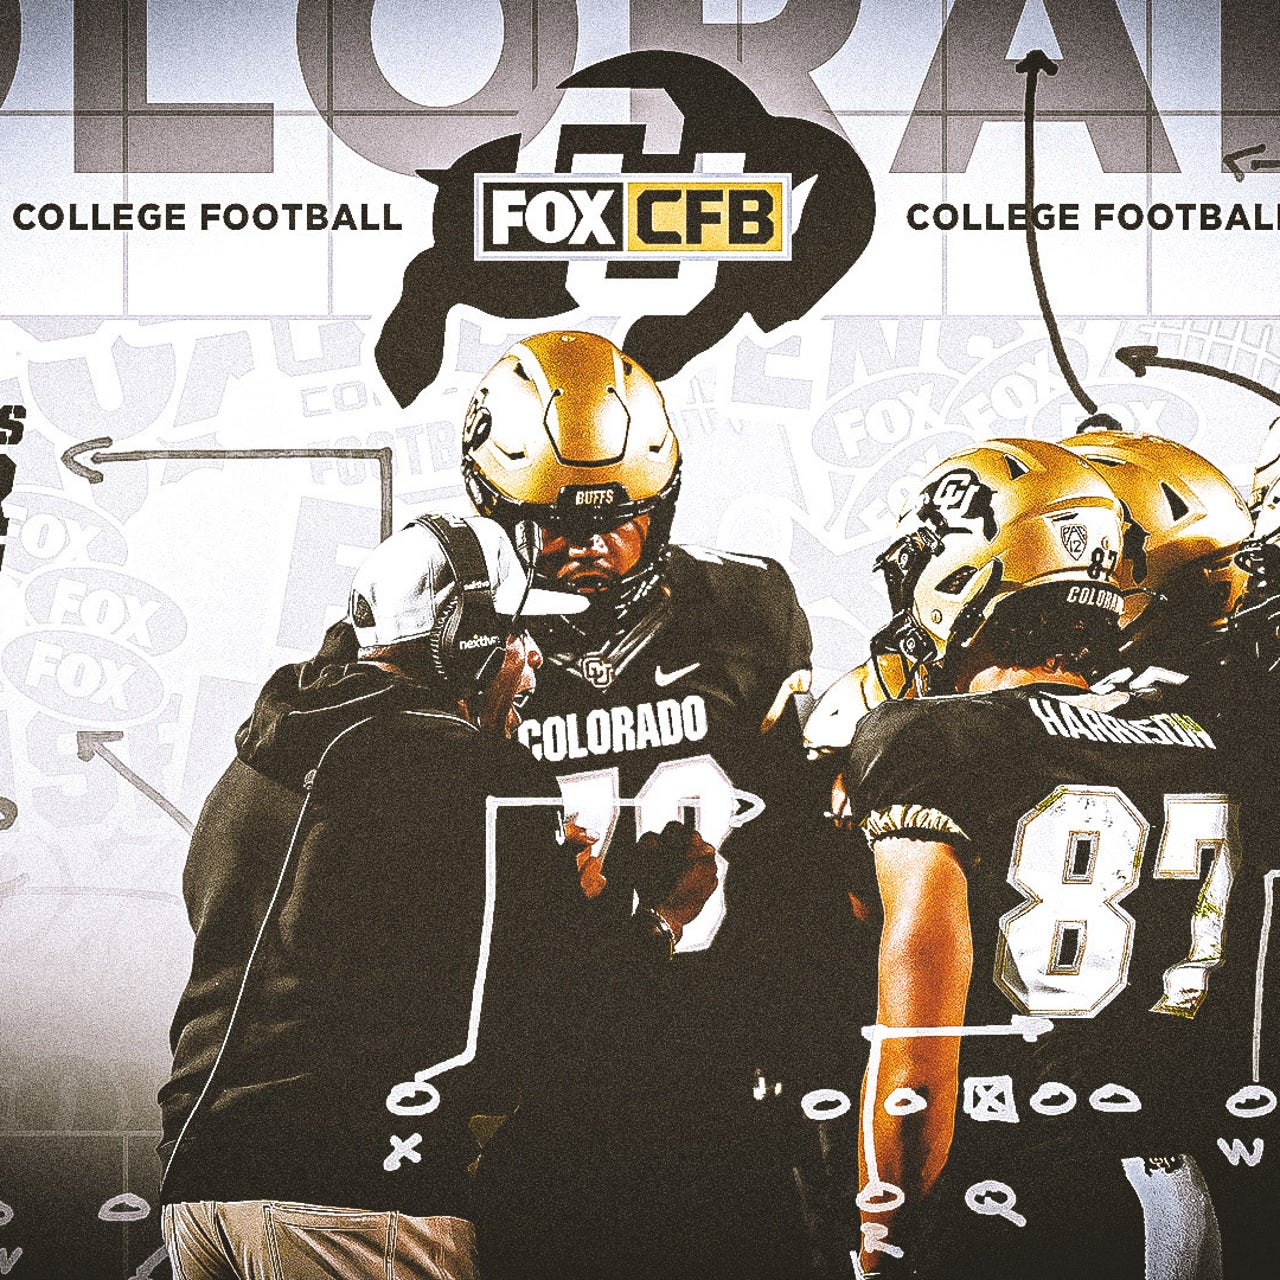 What does the L and D mean on the Colorado Buffaloes football